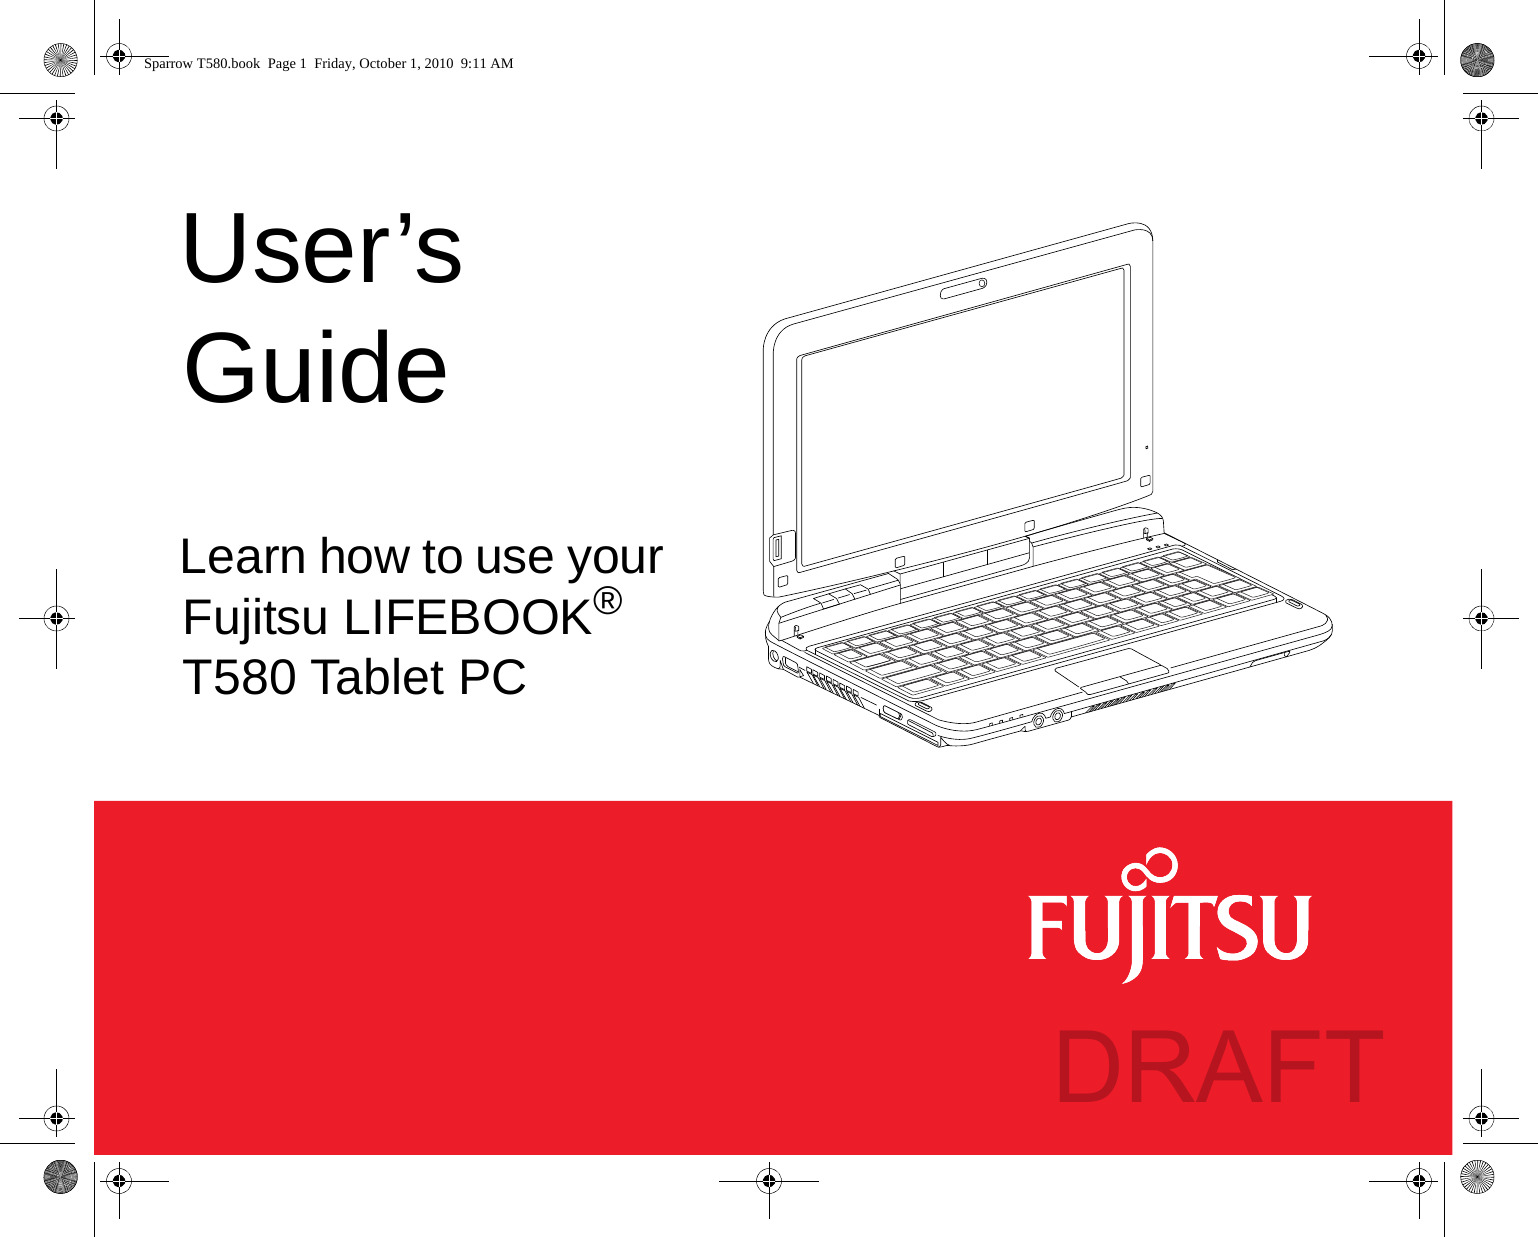  User’s GuideLearn how to use your Fujitsu LIFEBOOK® T580 Tablet PCSparrow T580.book  Page 1  Friday, October 1, 2010  9:11 AMDRAFT